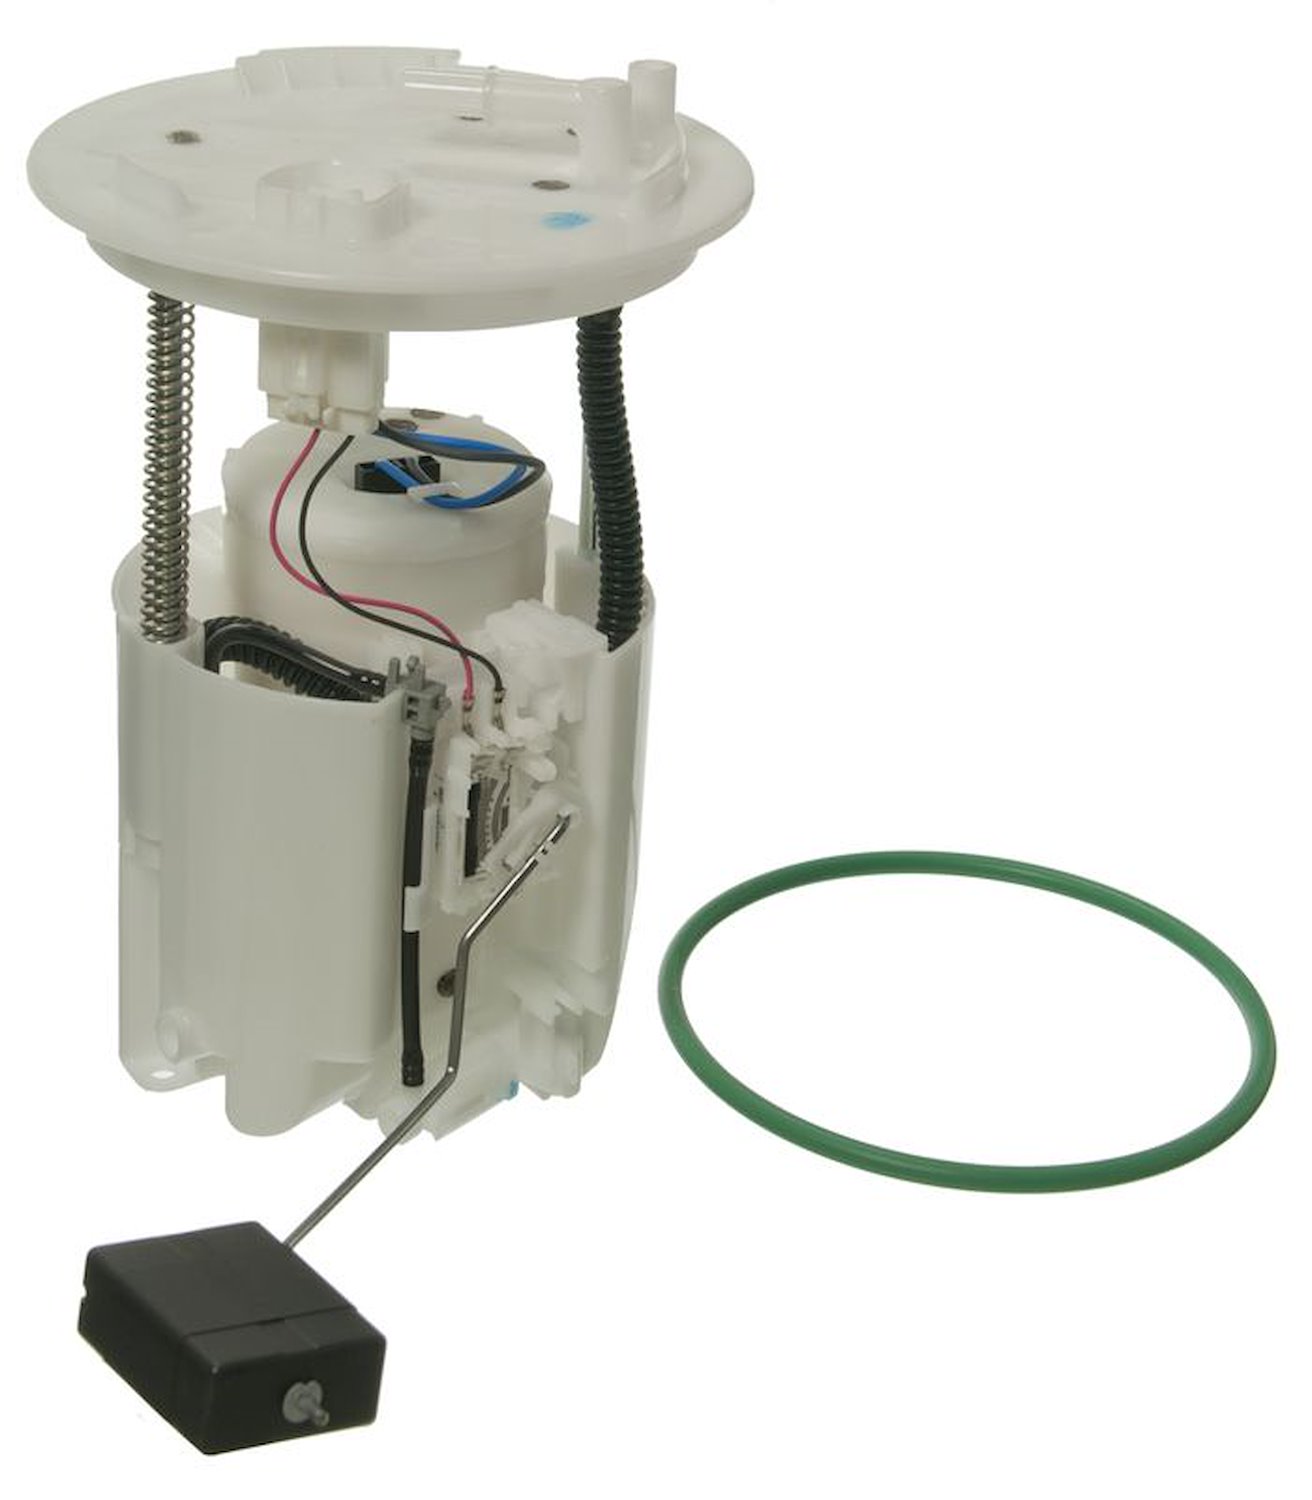 OE Ford Replacement Fuel Pump Module Assembly for 2008-2009 Ford Fusion/Lincoln MKZ/Mercury Milan